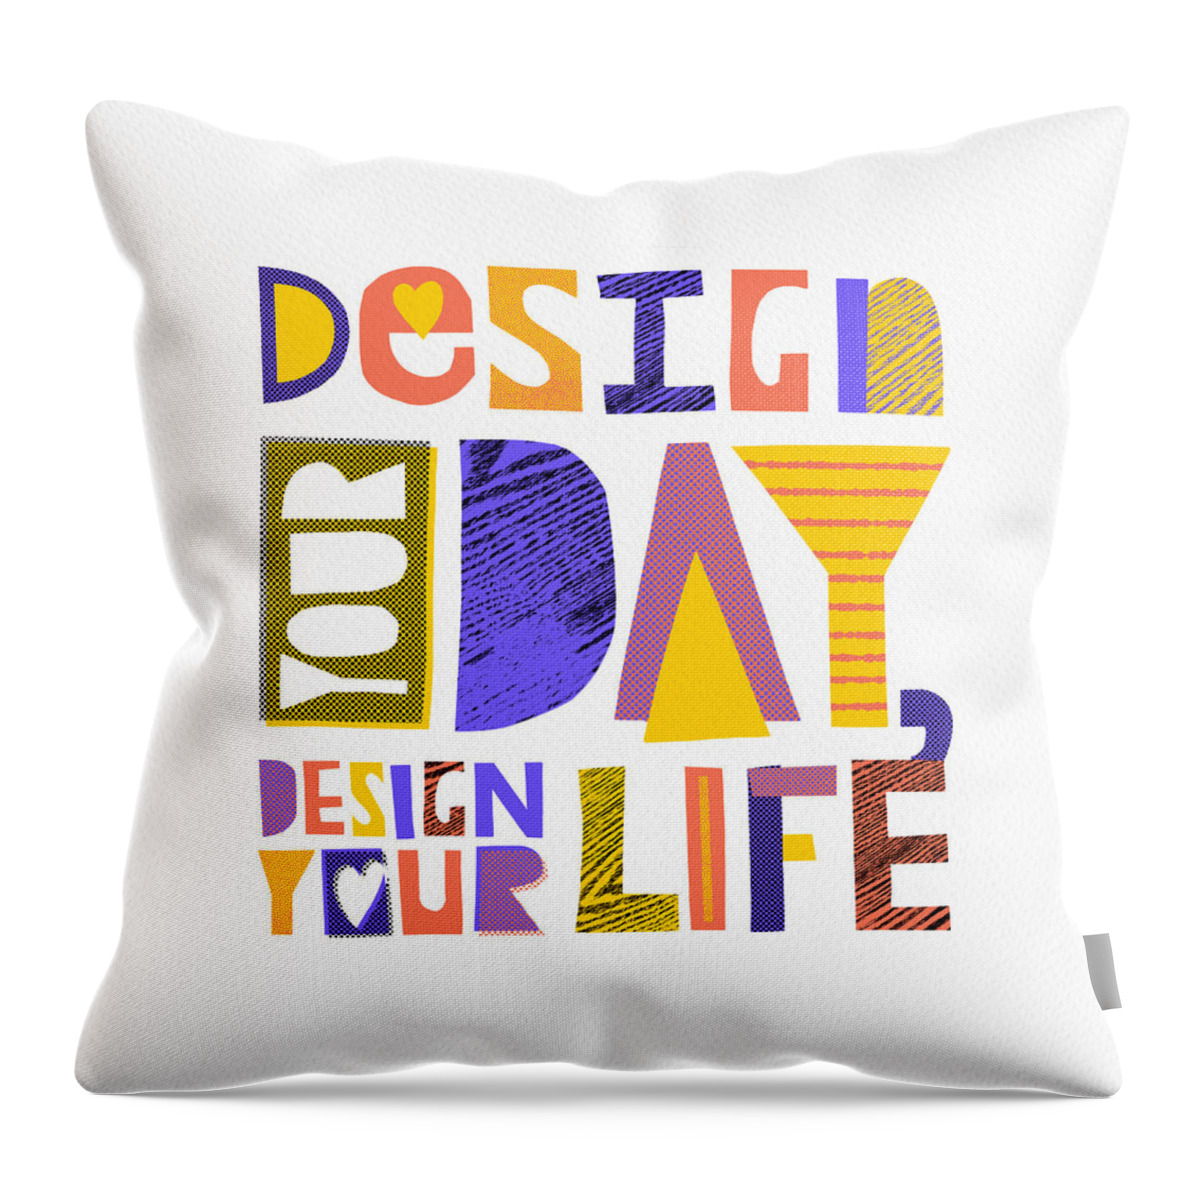 Halftone Throw Pillow featuring the painting Design Your Day, Design Your Life - Art by Jen Montgomery by Jen Montgomery